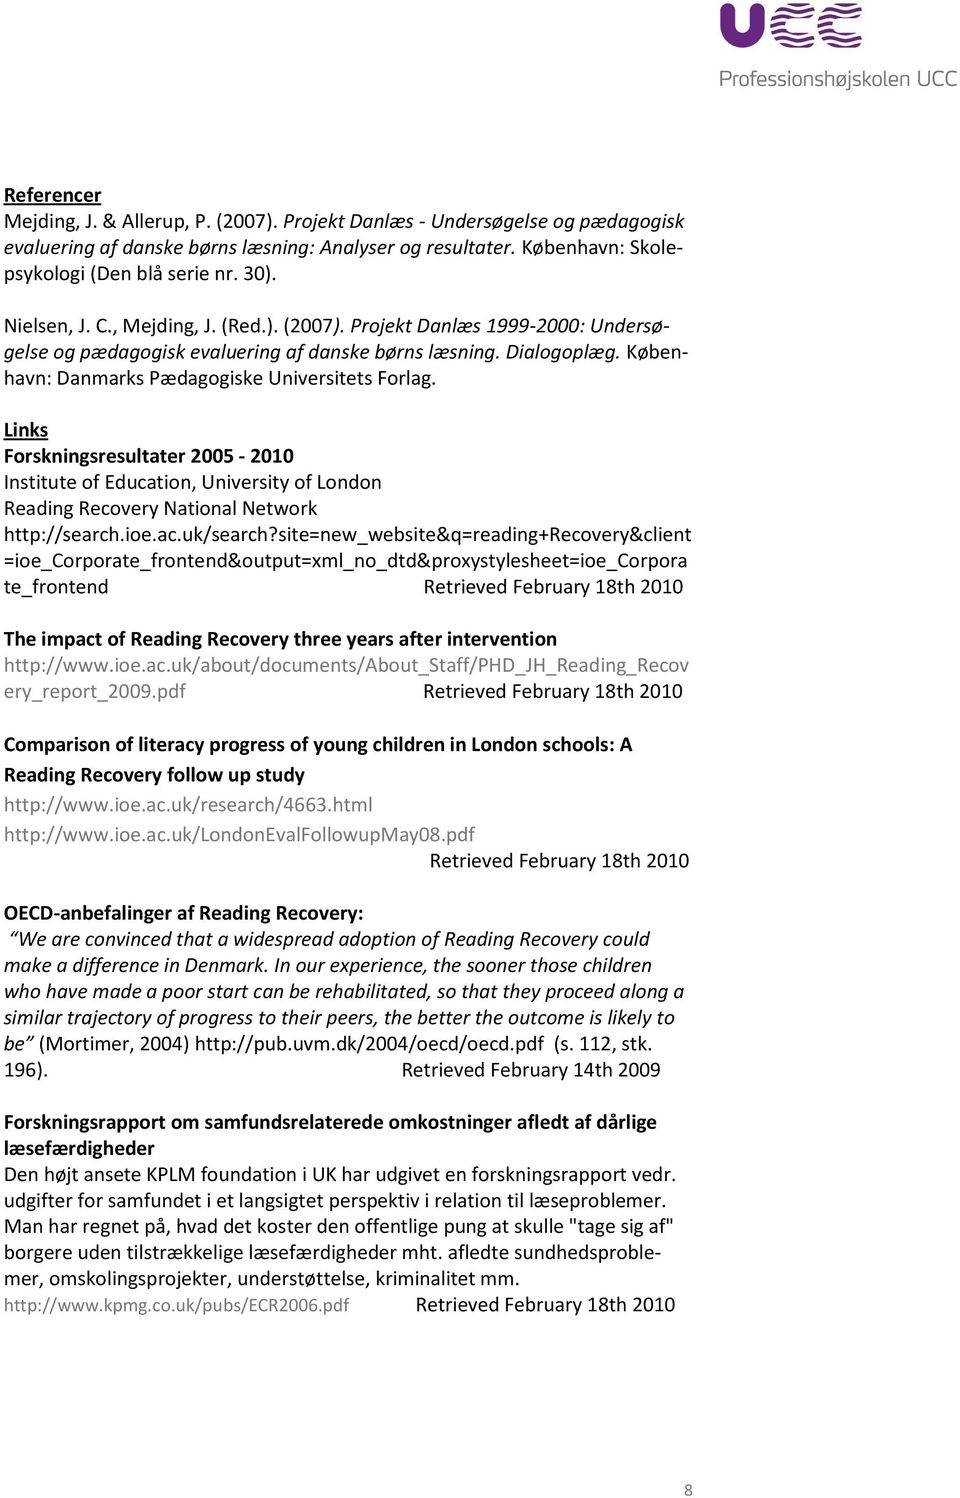 Links Forskningsresultater 2005-2010 Institute of Education, University of London Reading Recovery National Network http://search.ioe.ac.uk/search?